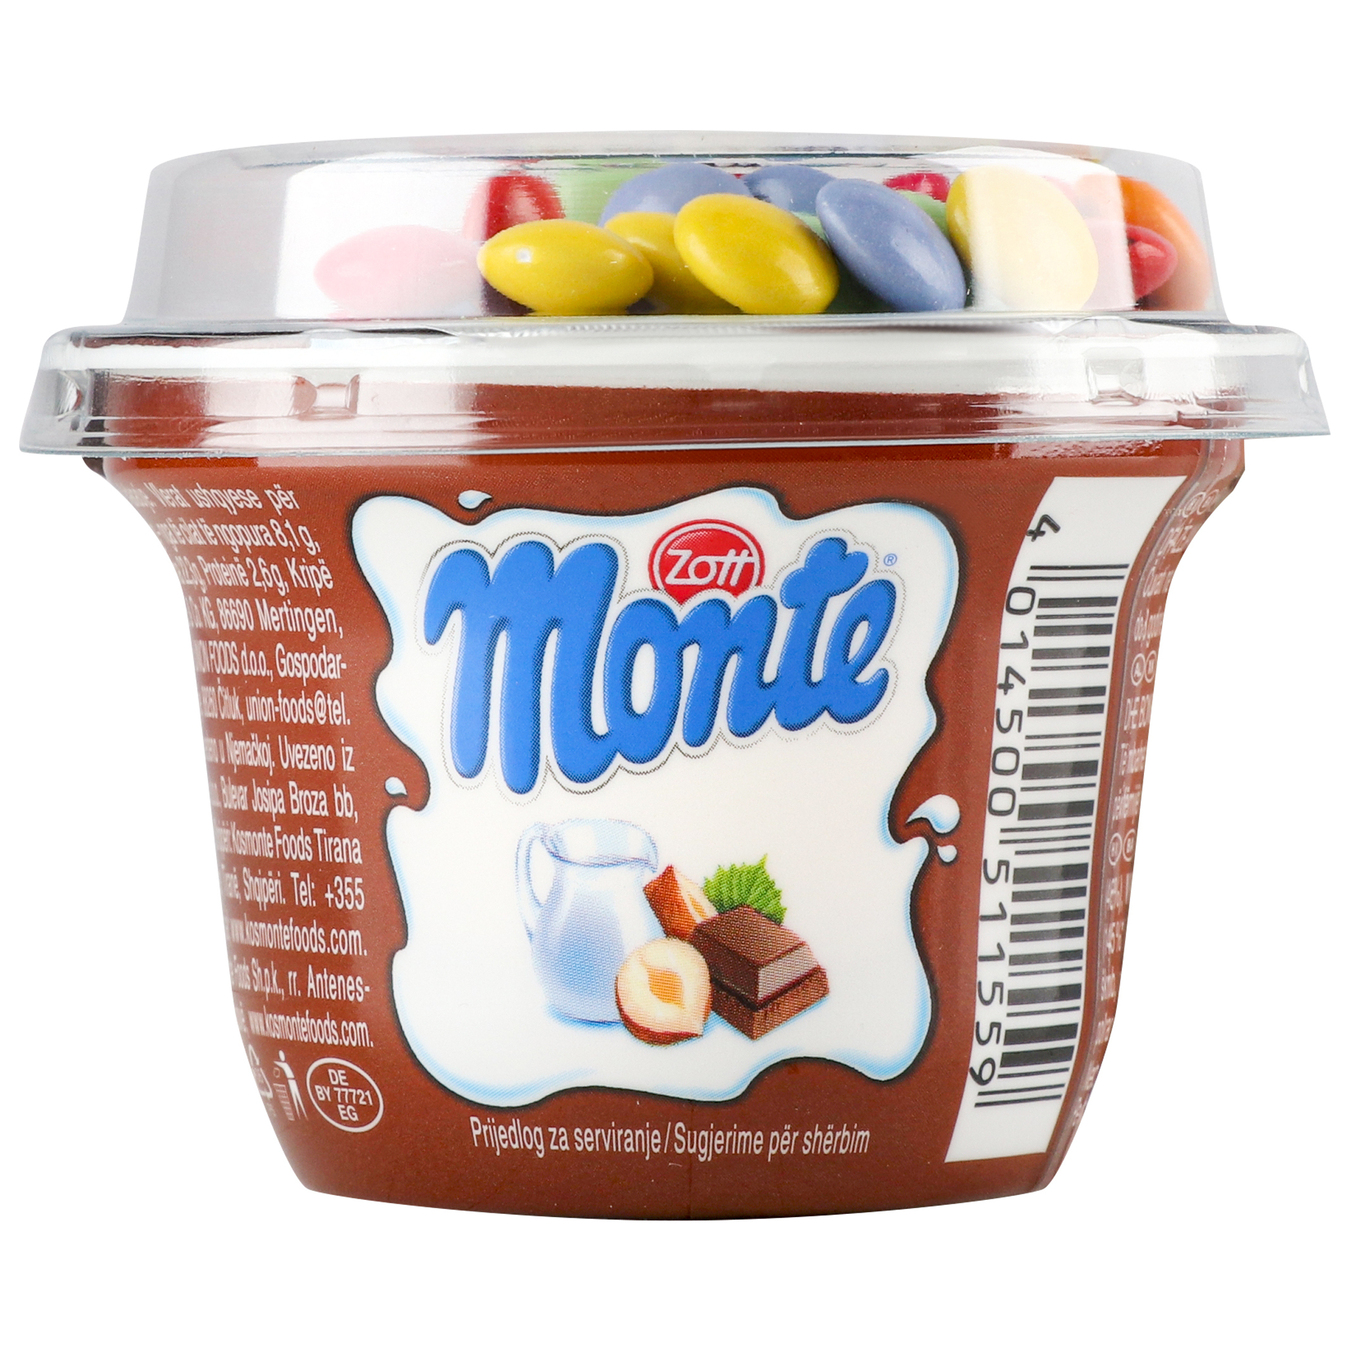 Zott Monte dessert with chocolate, hazelnuts and cocoa dragee 70g